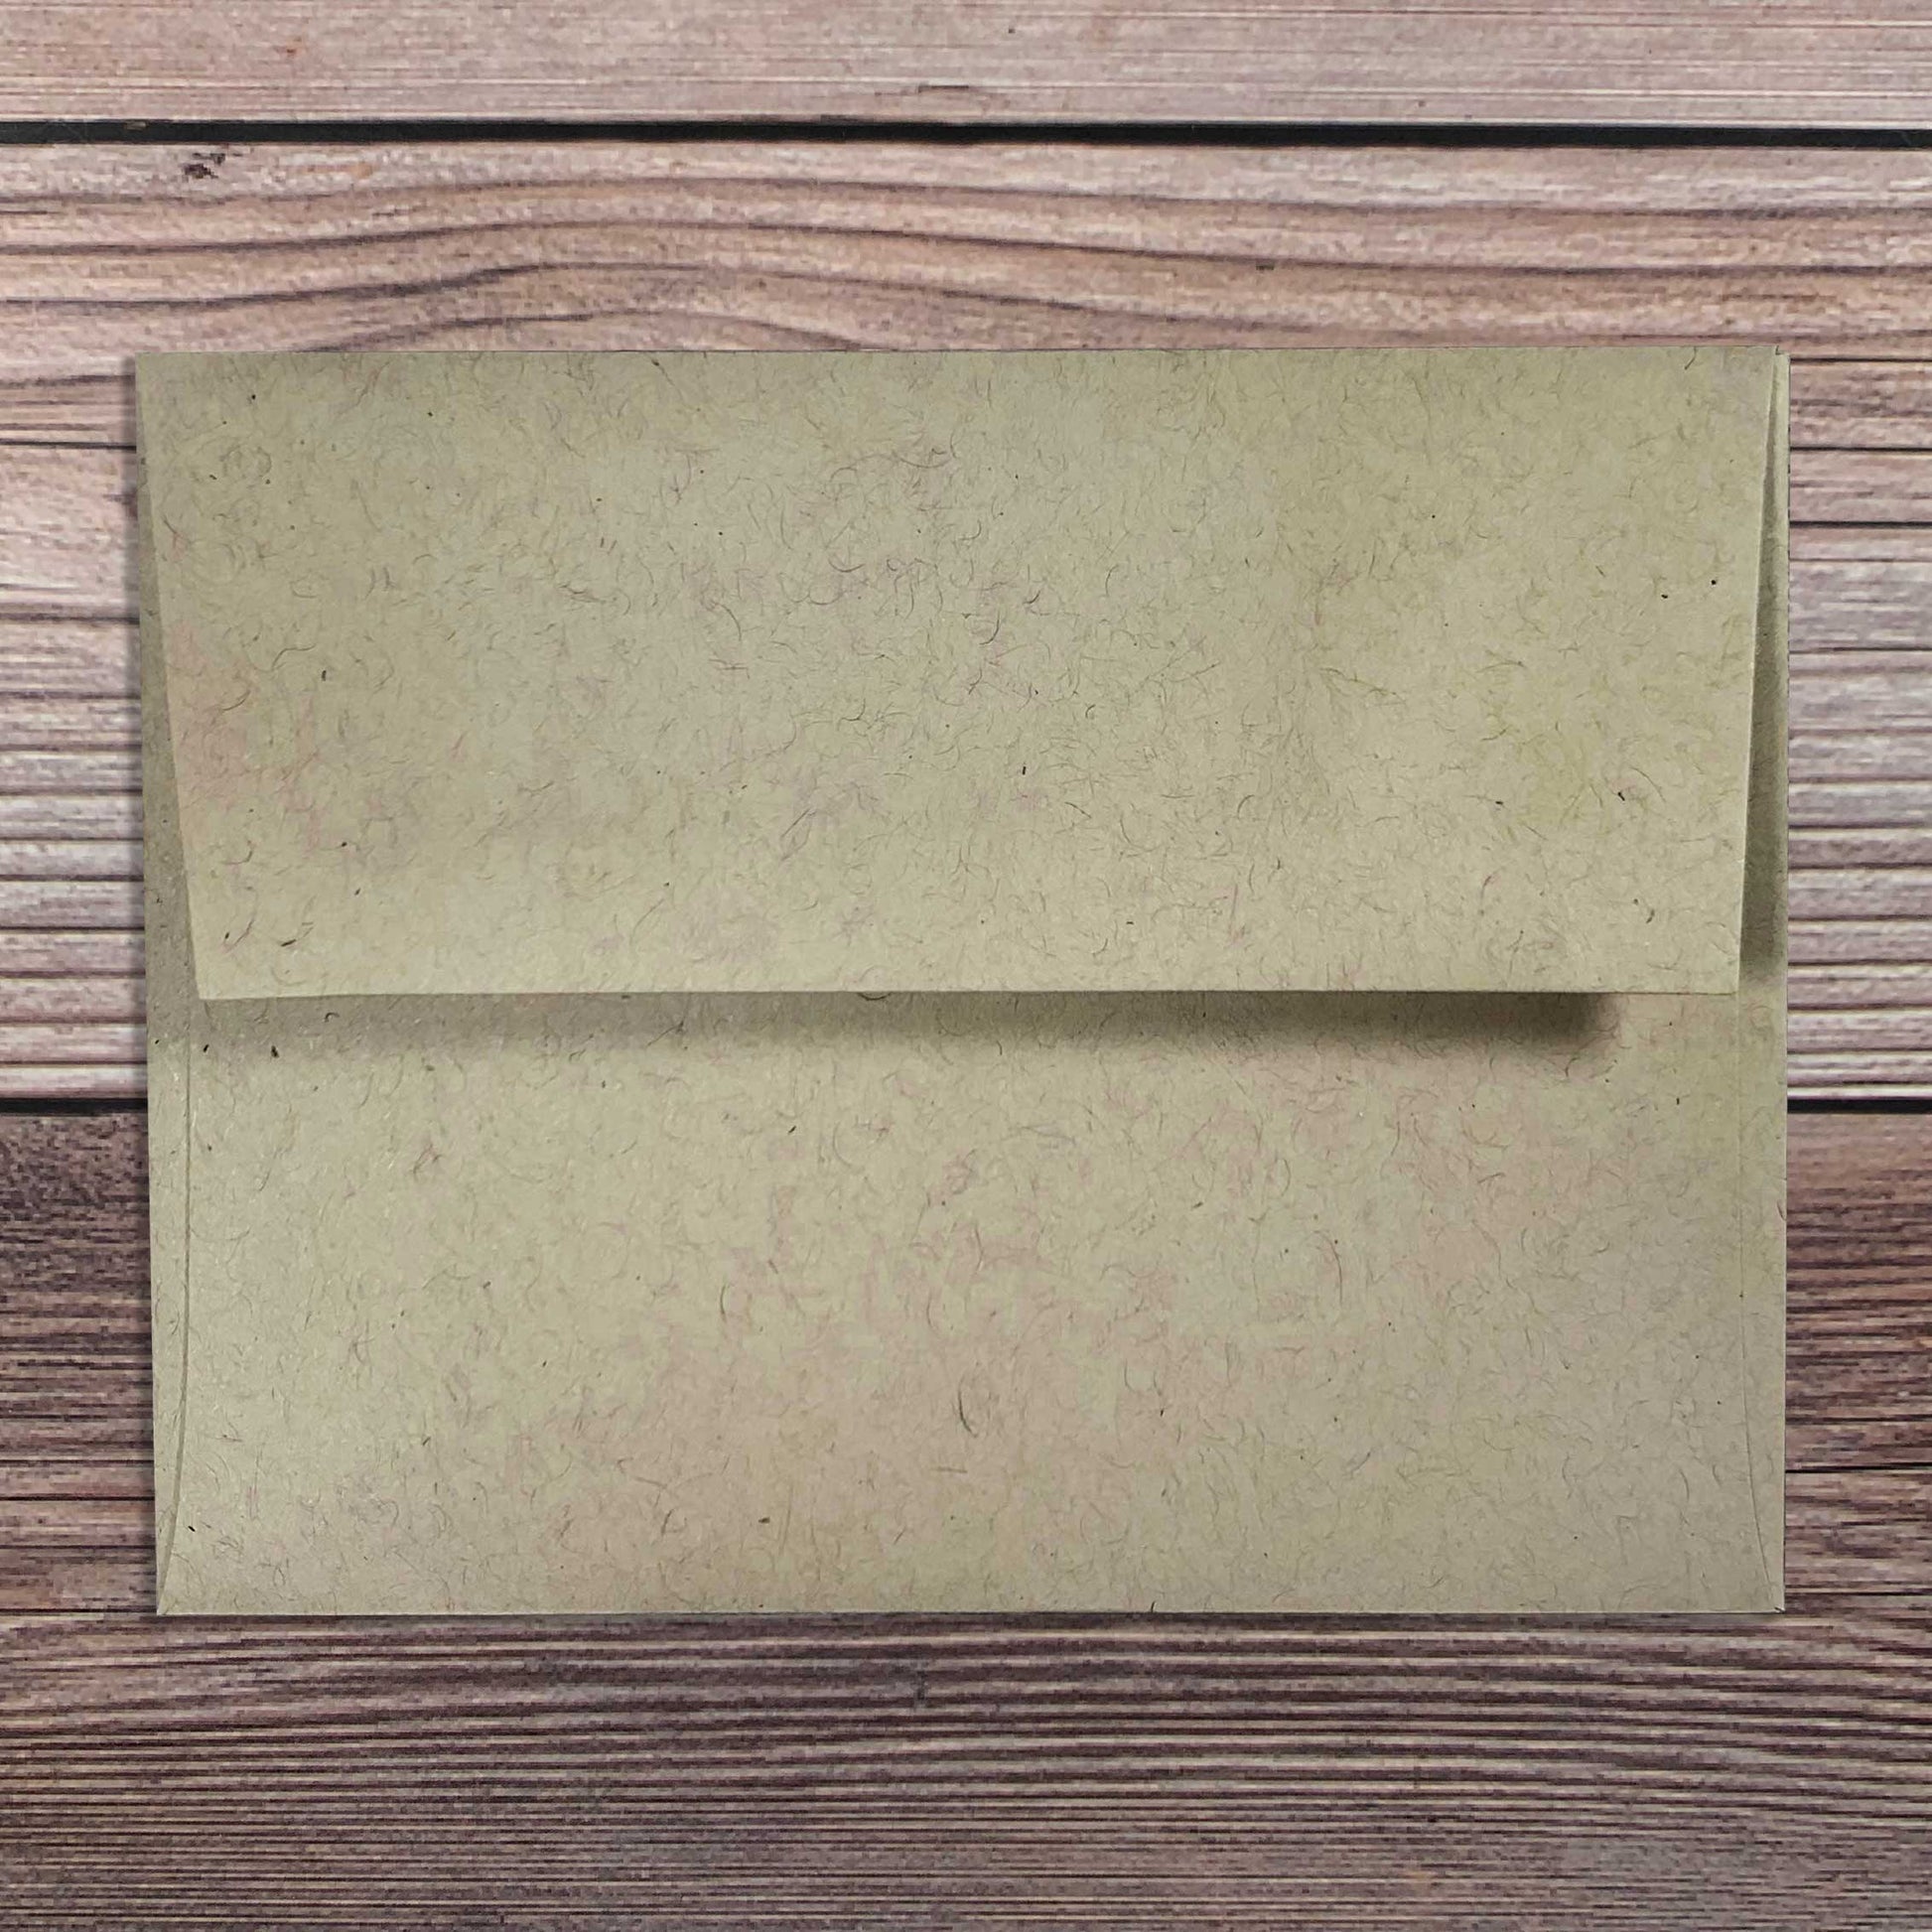 Greeting Card envelope, kraft color, square flap, included with letterpress greeting card.